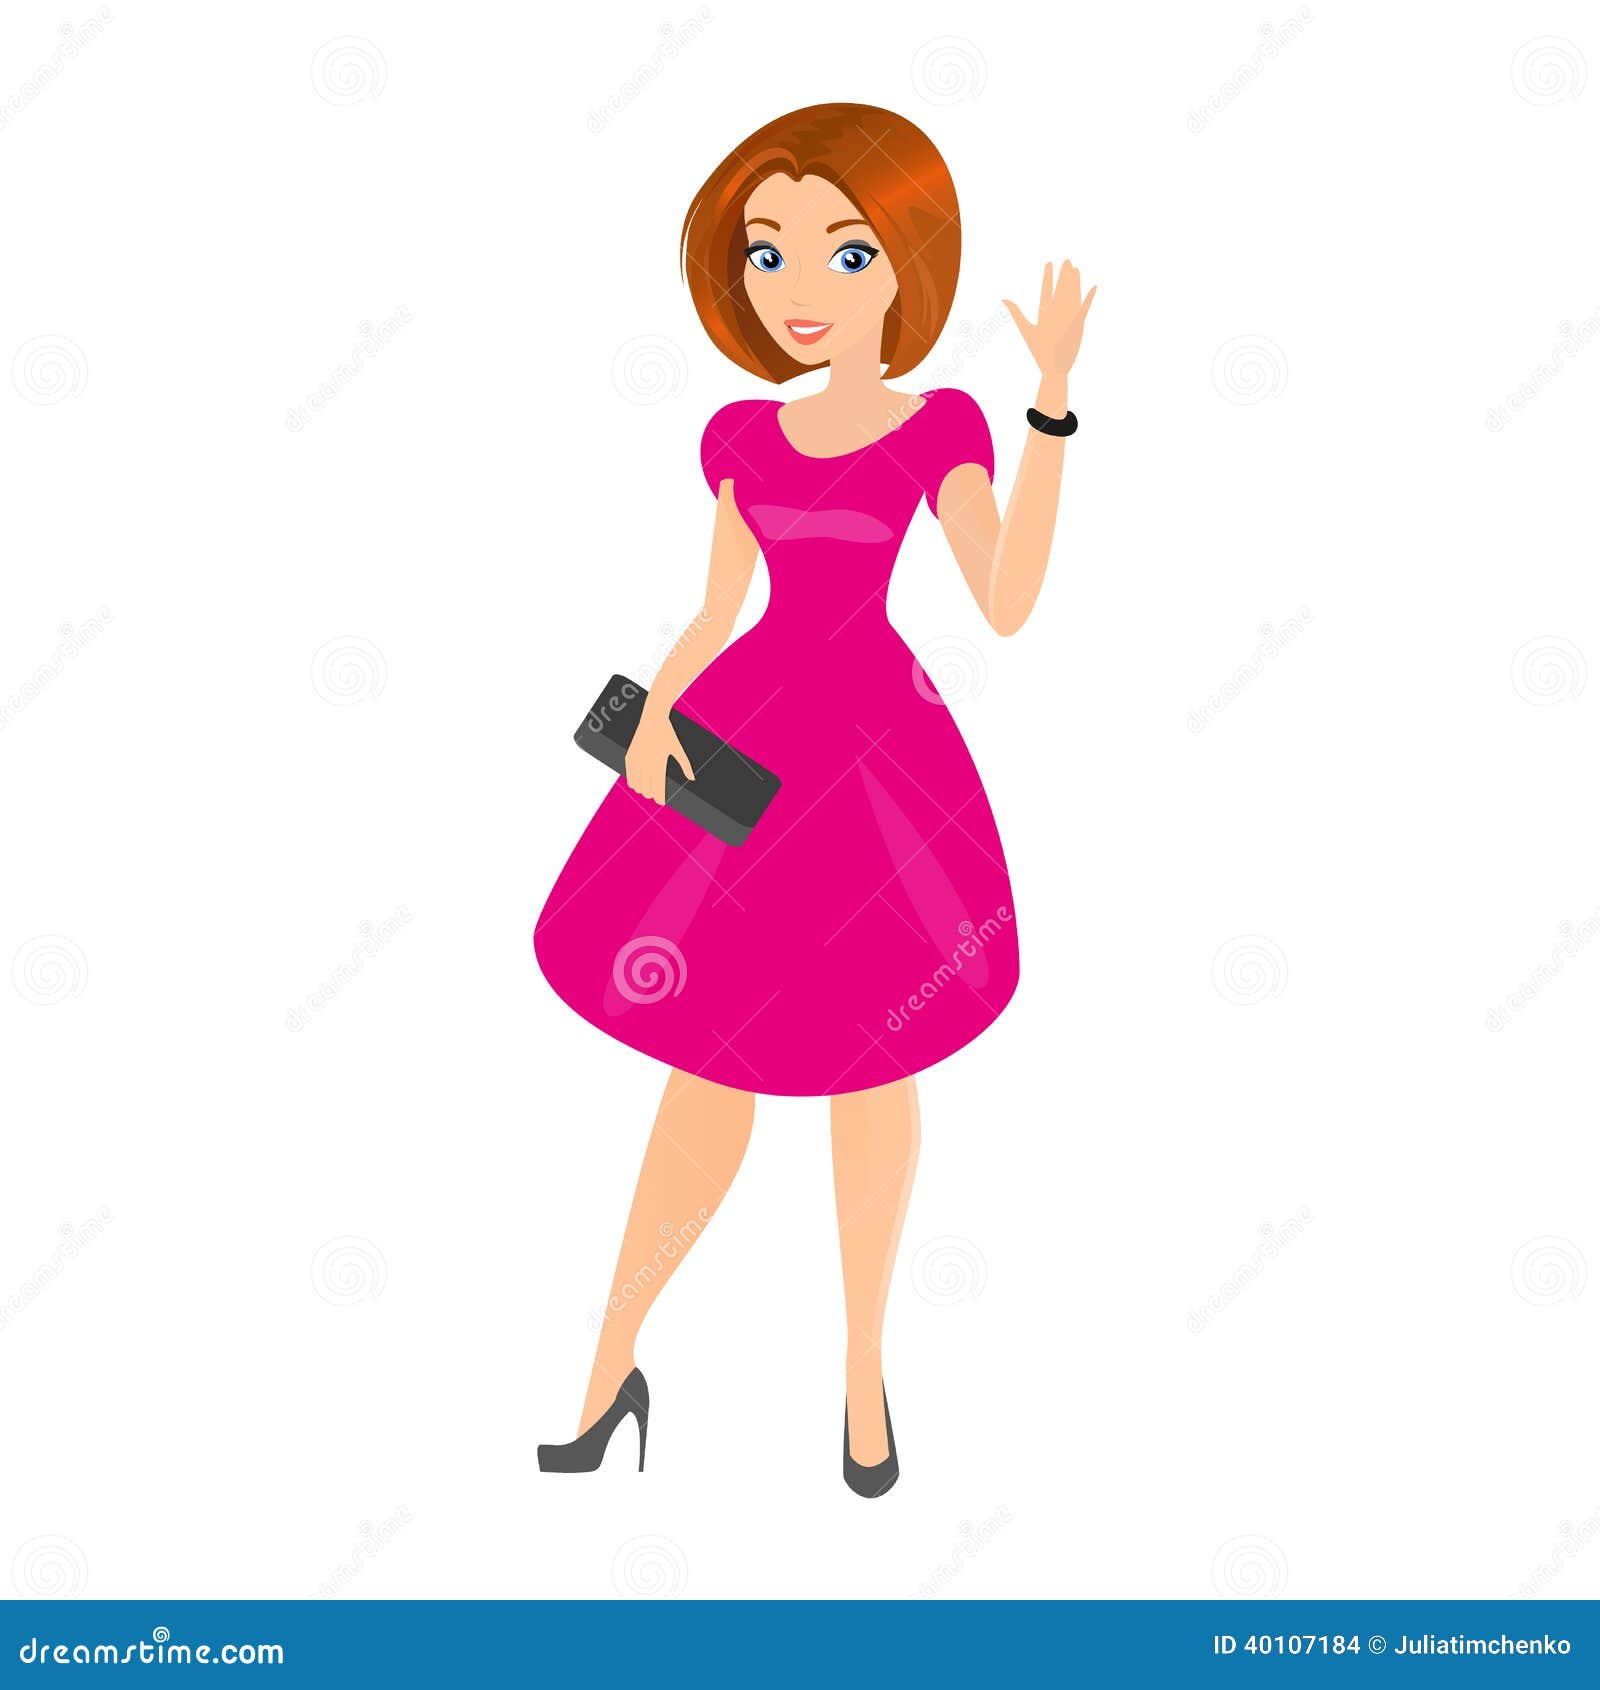 clipart young woman - photo #5